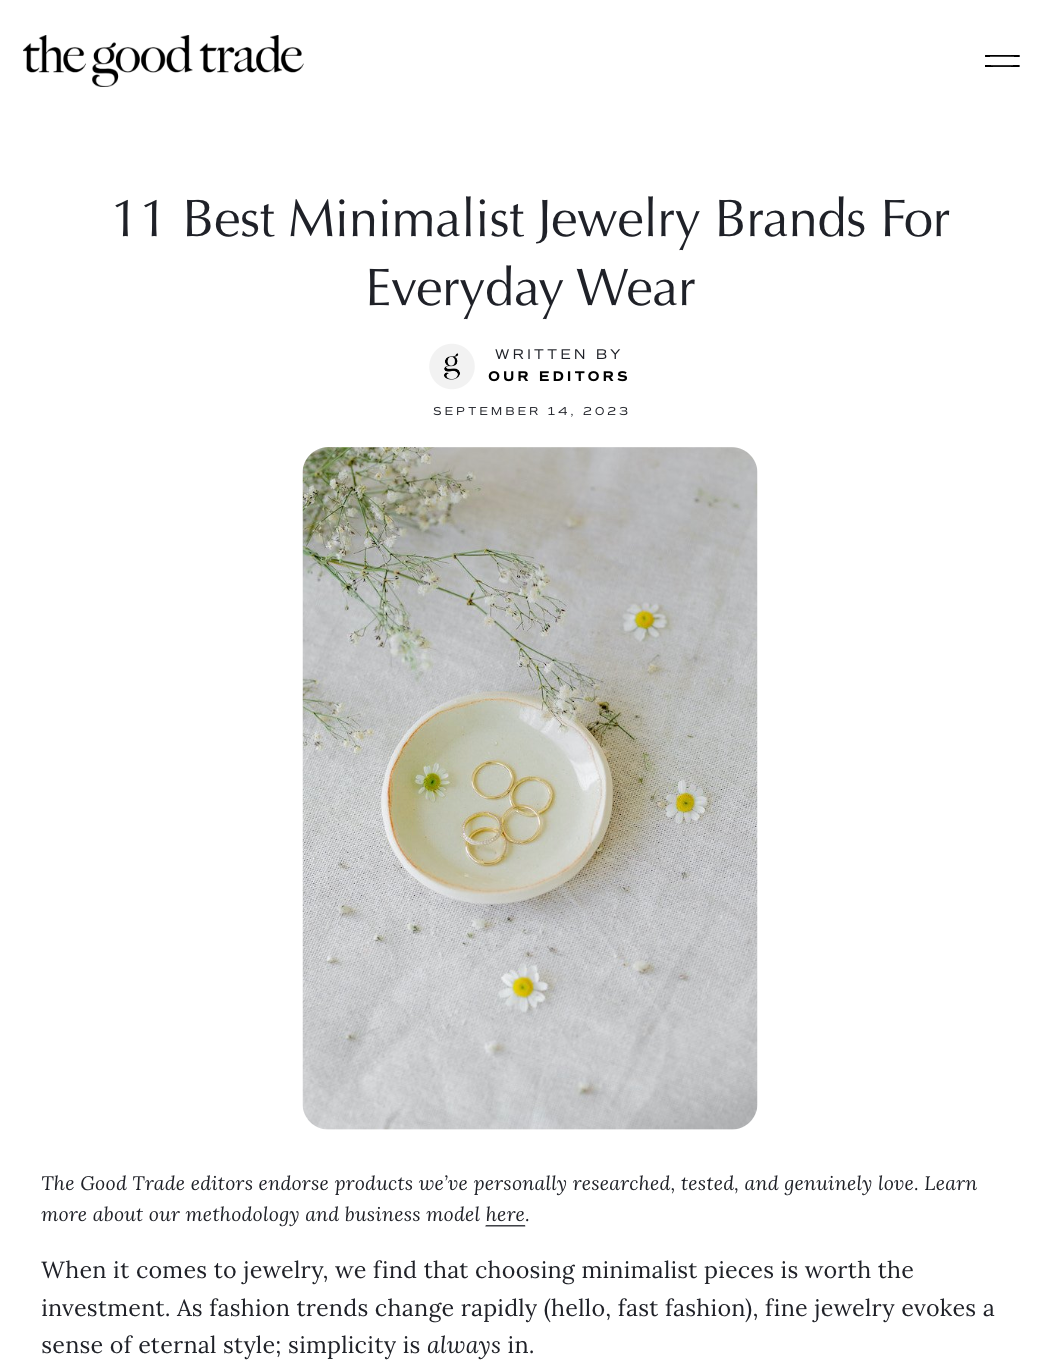 The Good Trade Recommends Aiden Jae As One Of The Best Minimalist Jewelry Brands For Everyday Wear!